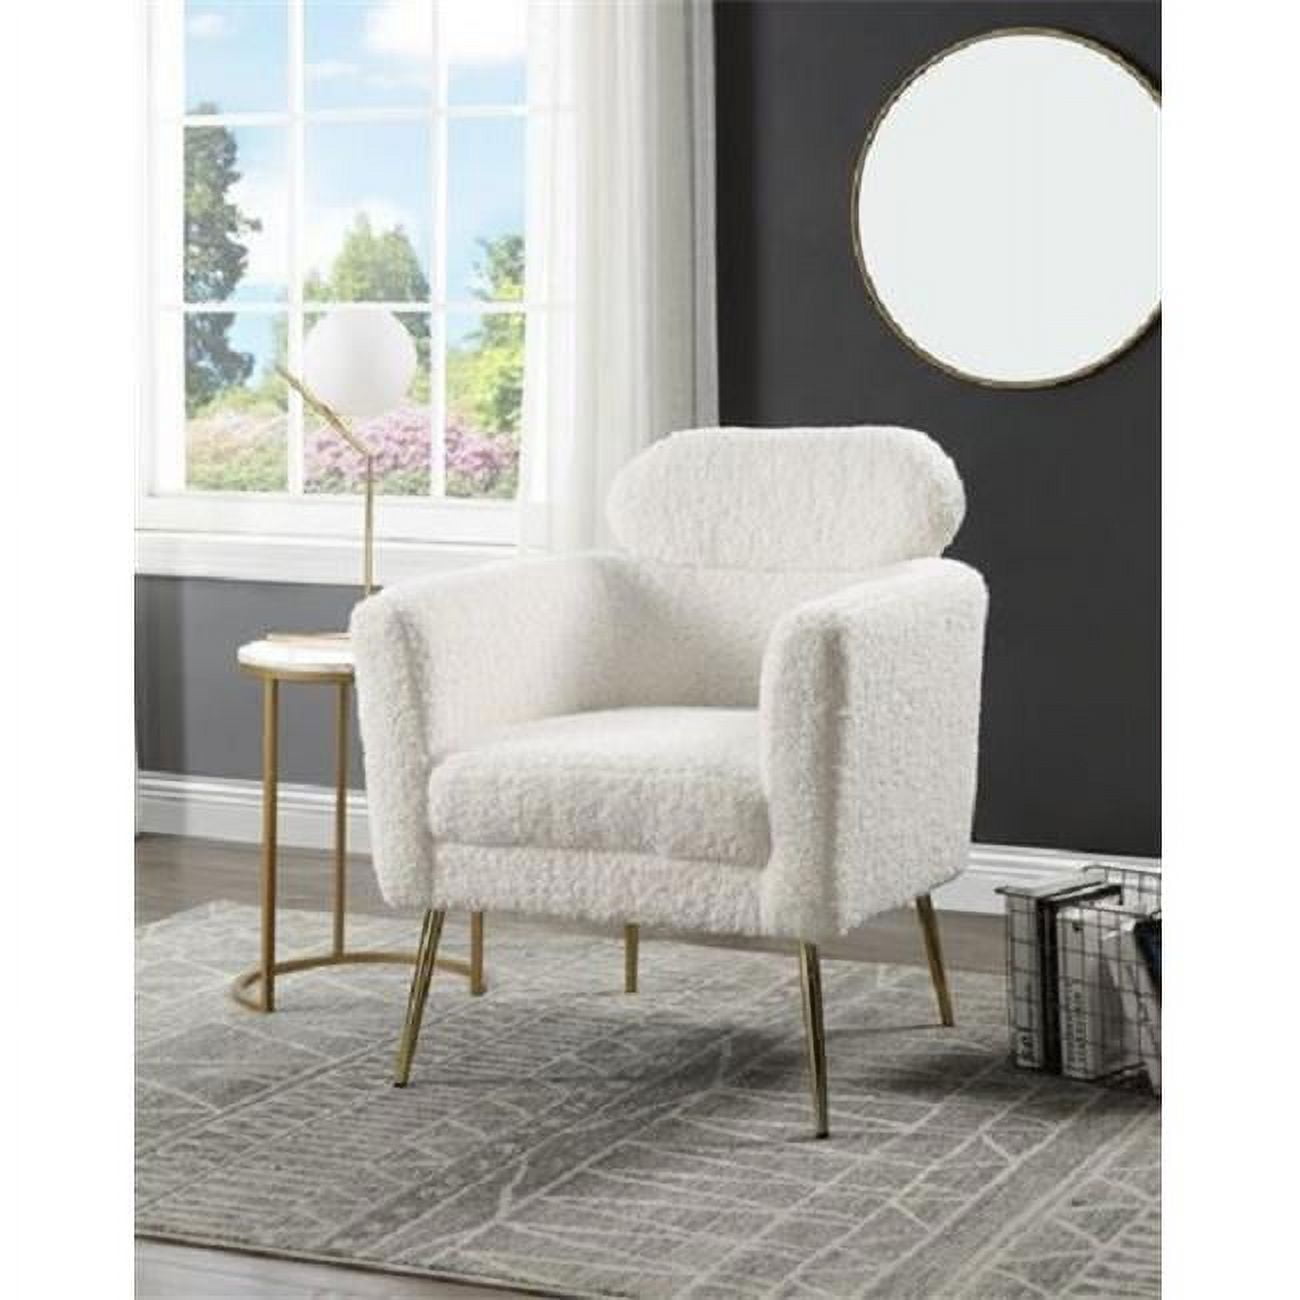 Picture of Acme Furniture AC00124 34 x 32 x 30 in. Connock Accent Chair, White